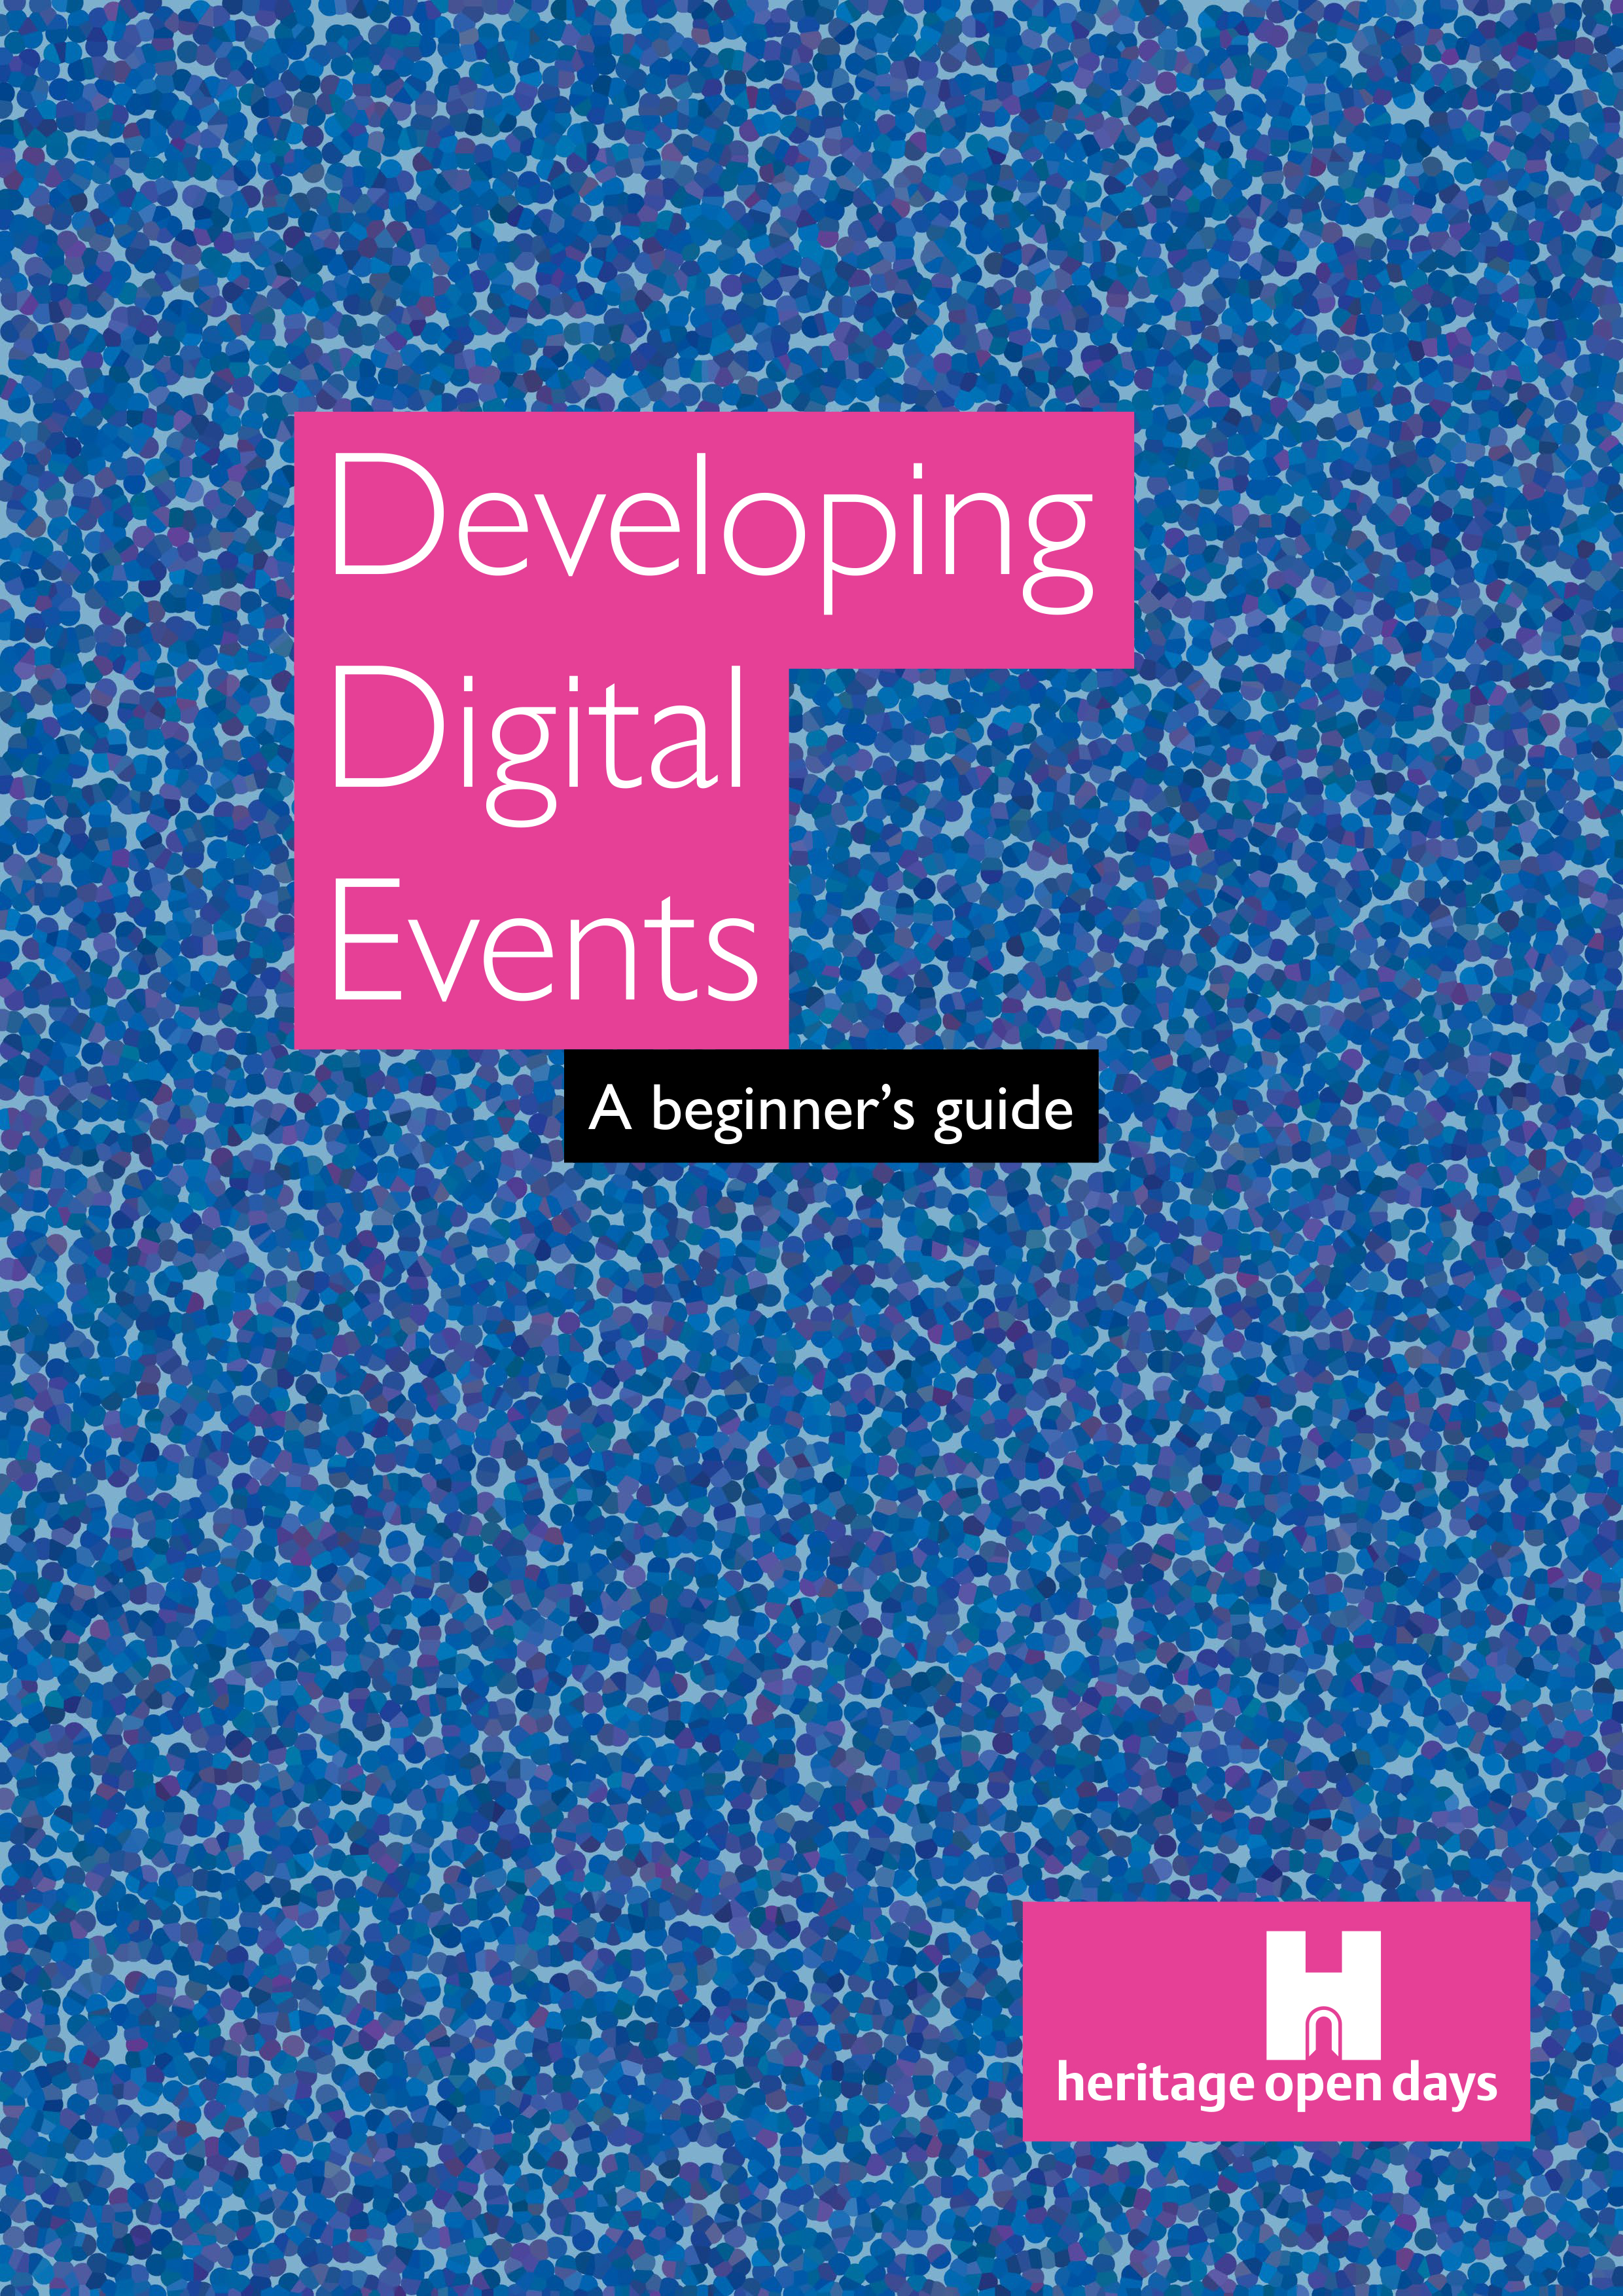 Front cover of Developing Digital Events Guide.